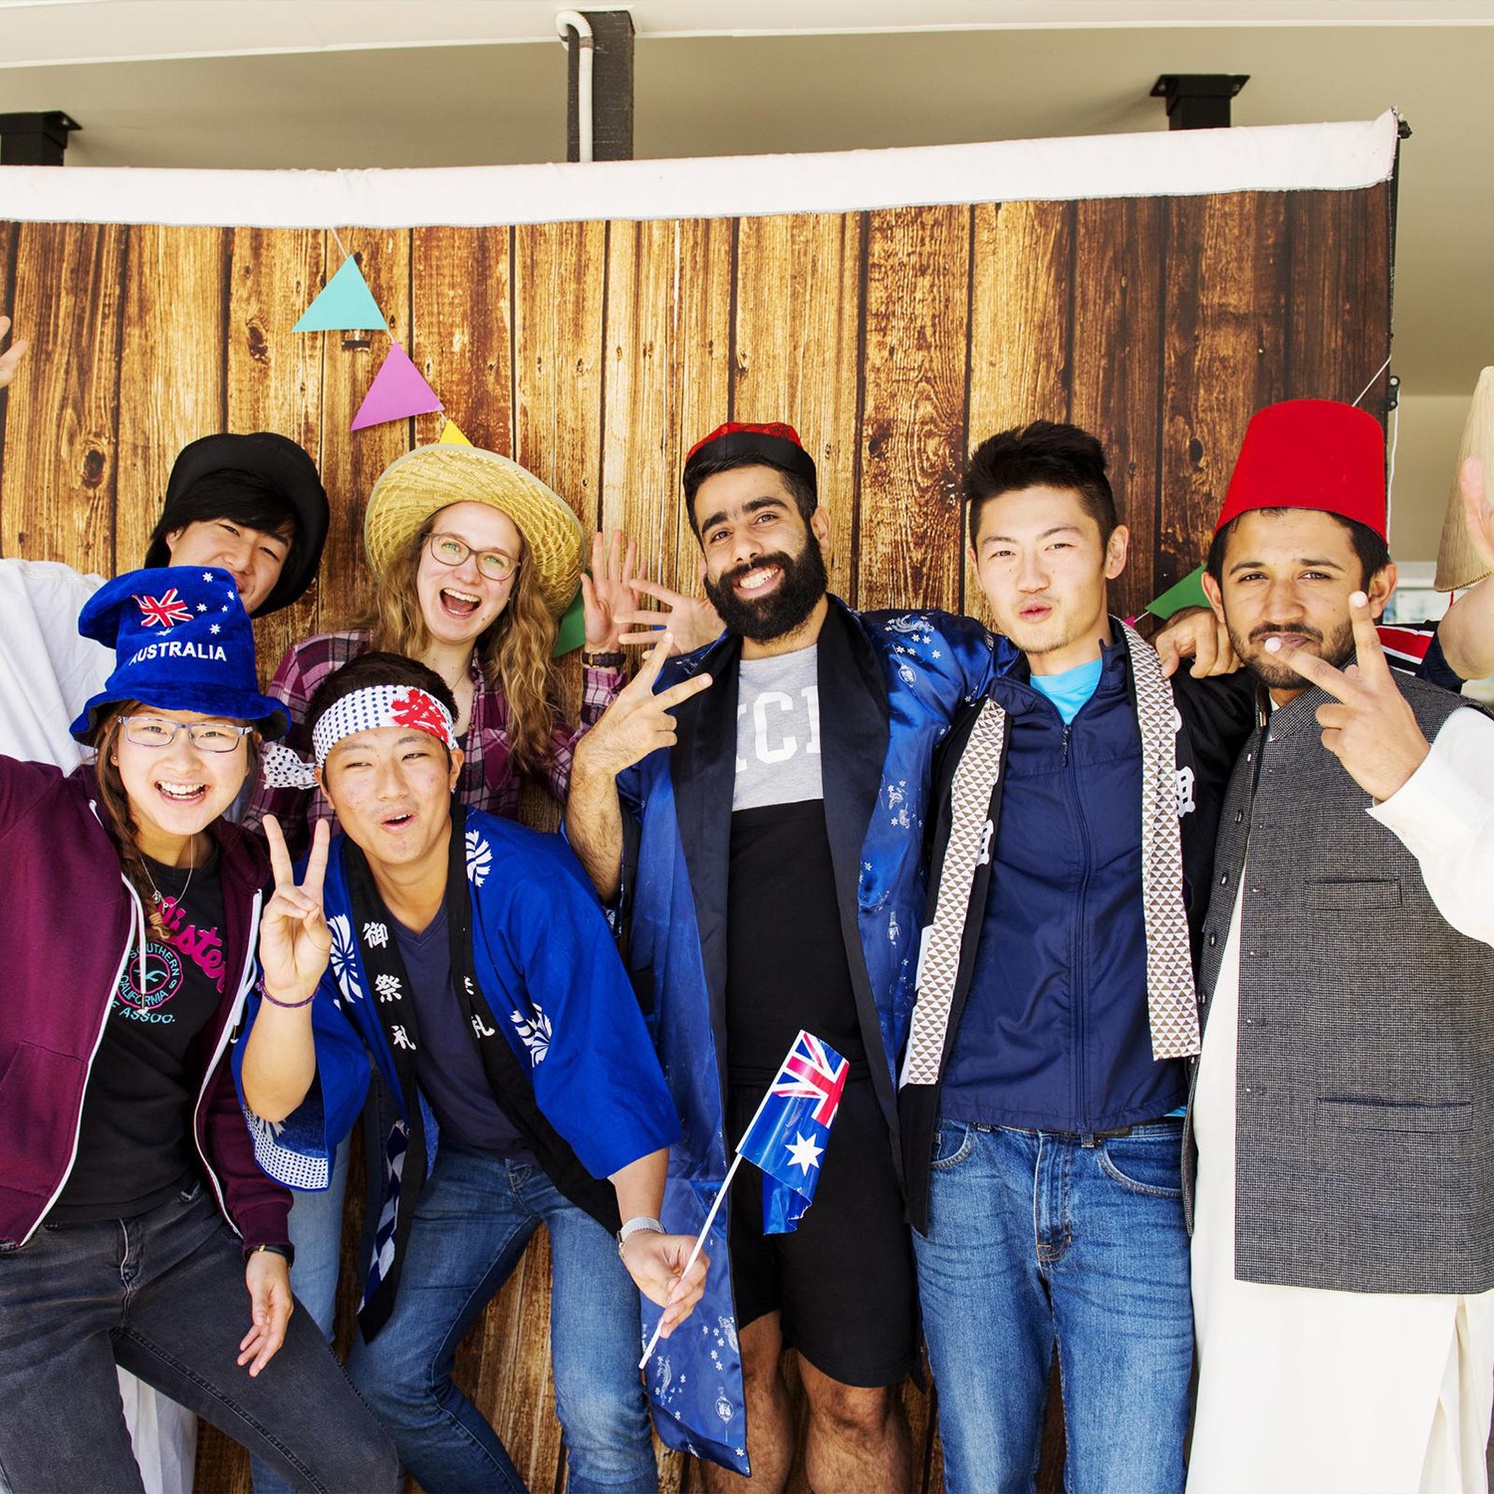 Group of International students with flags and cultural dress